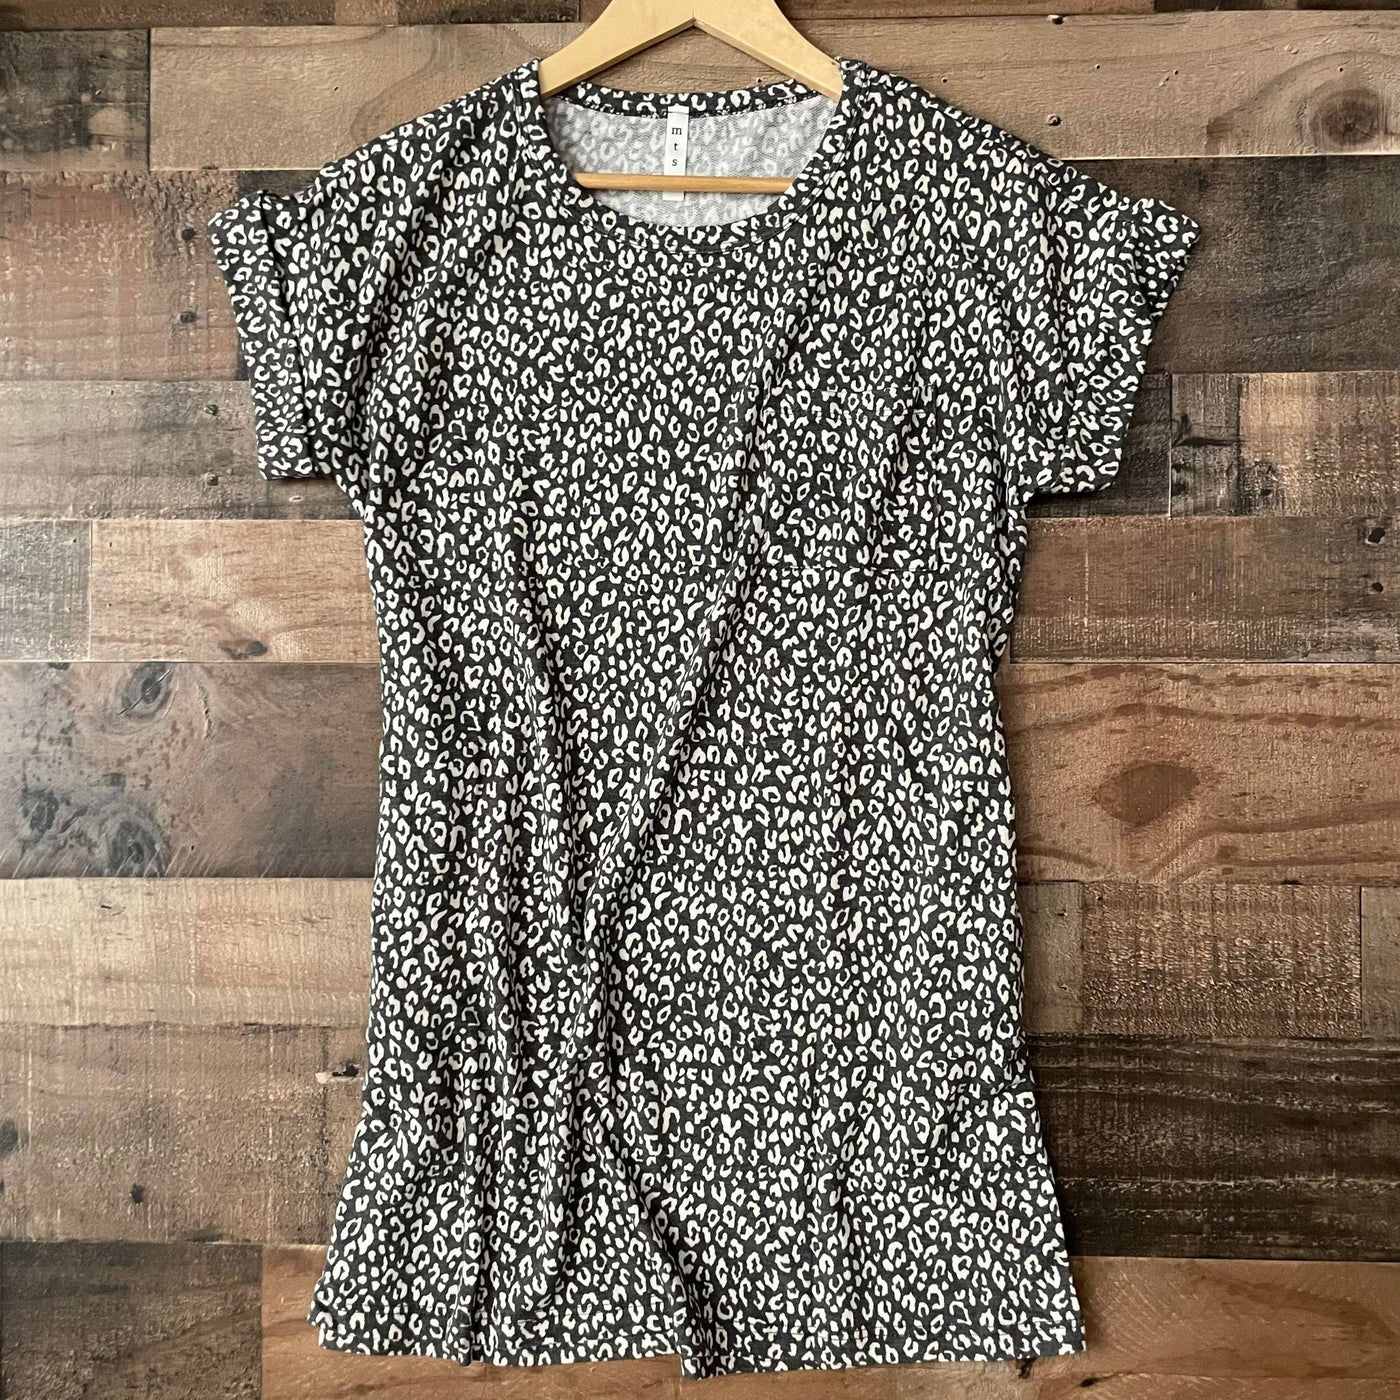 Afternoon Out Animal Print Tee Tunic Dress